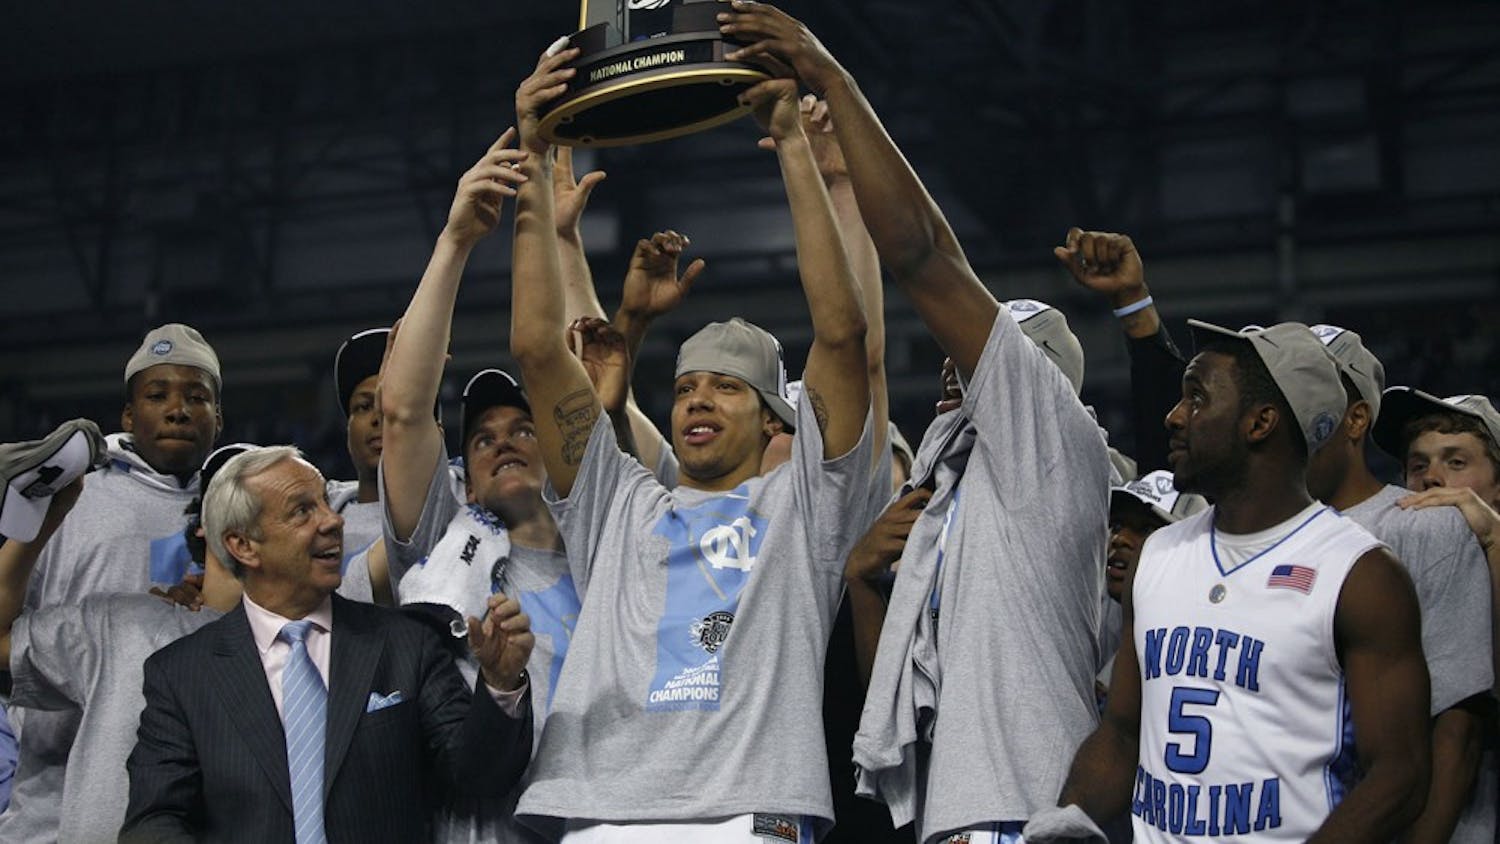 Danny Green raises the 2009 NCAA championship trophy with his team. Green has since gone on to win the NBA championship with the San Antonio Spurs.